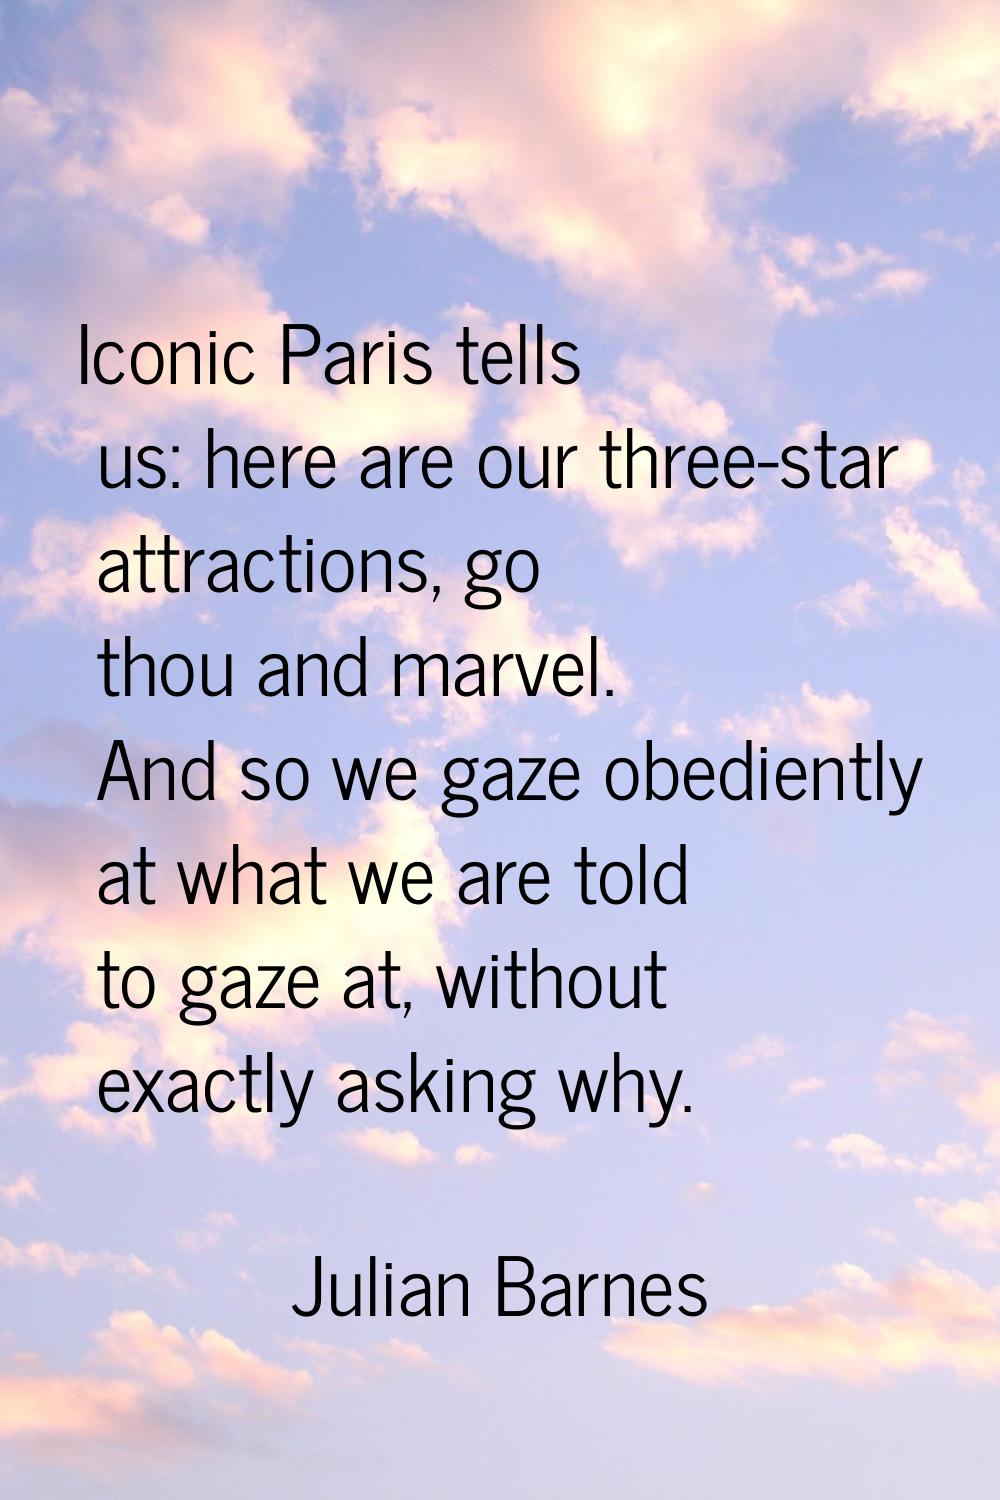 Iconic Paris tells us: here are our three-star attractions, go thou and marvel. And so we gaze obed